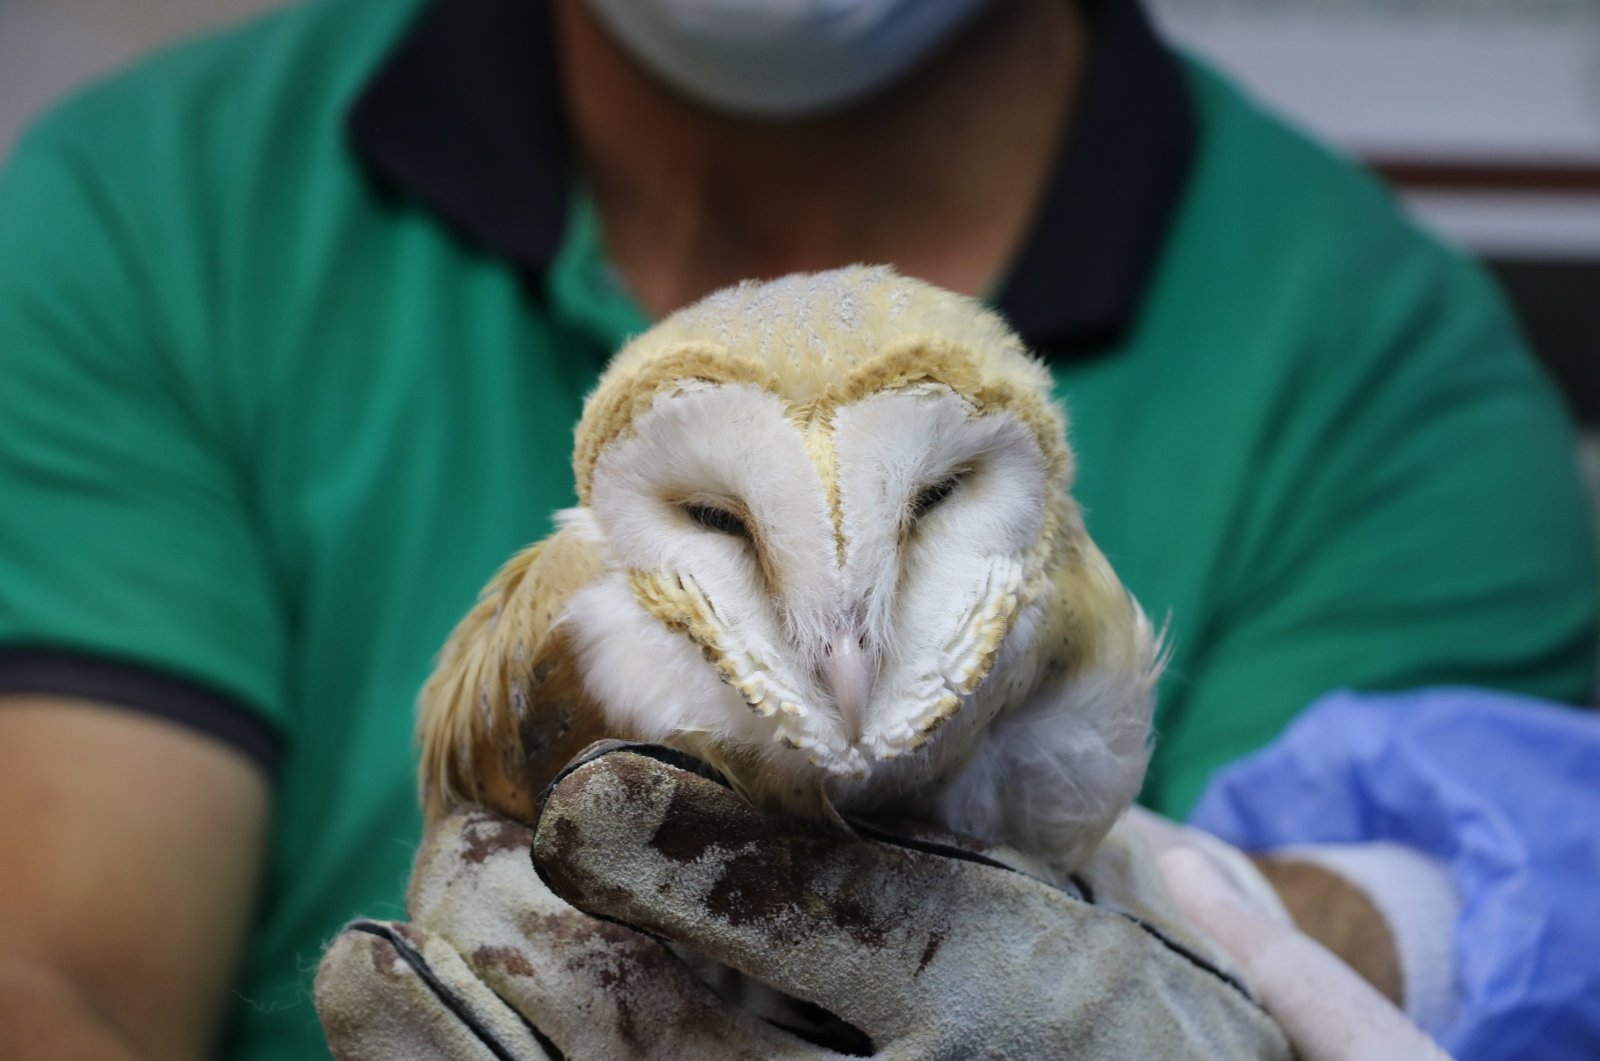 A rescued owl in the hands of a veterinarian at the Gaziantep Zoo, Turkey. (IHA Photo)